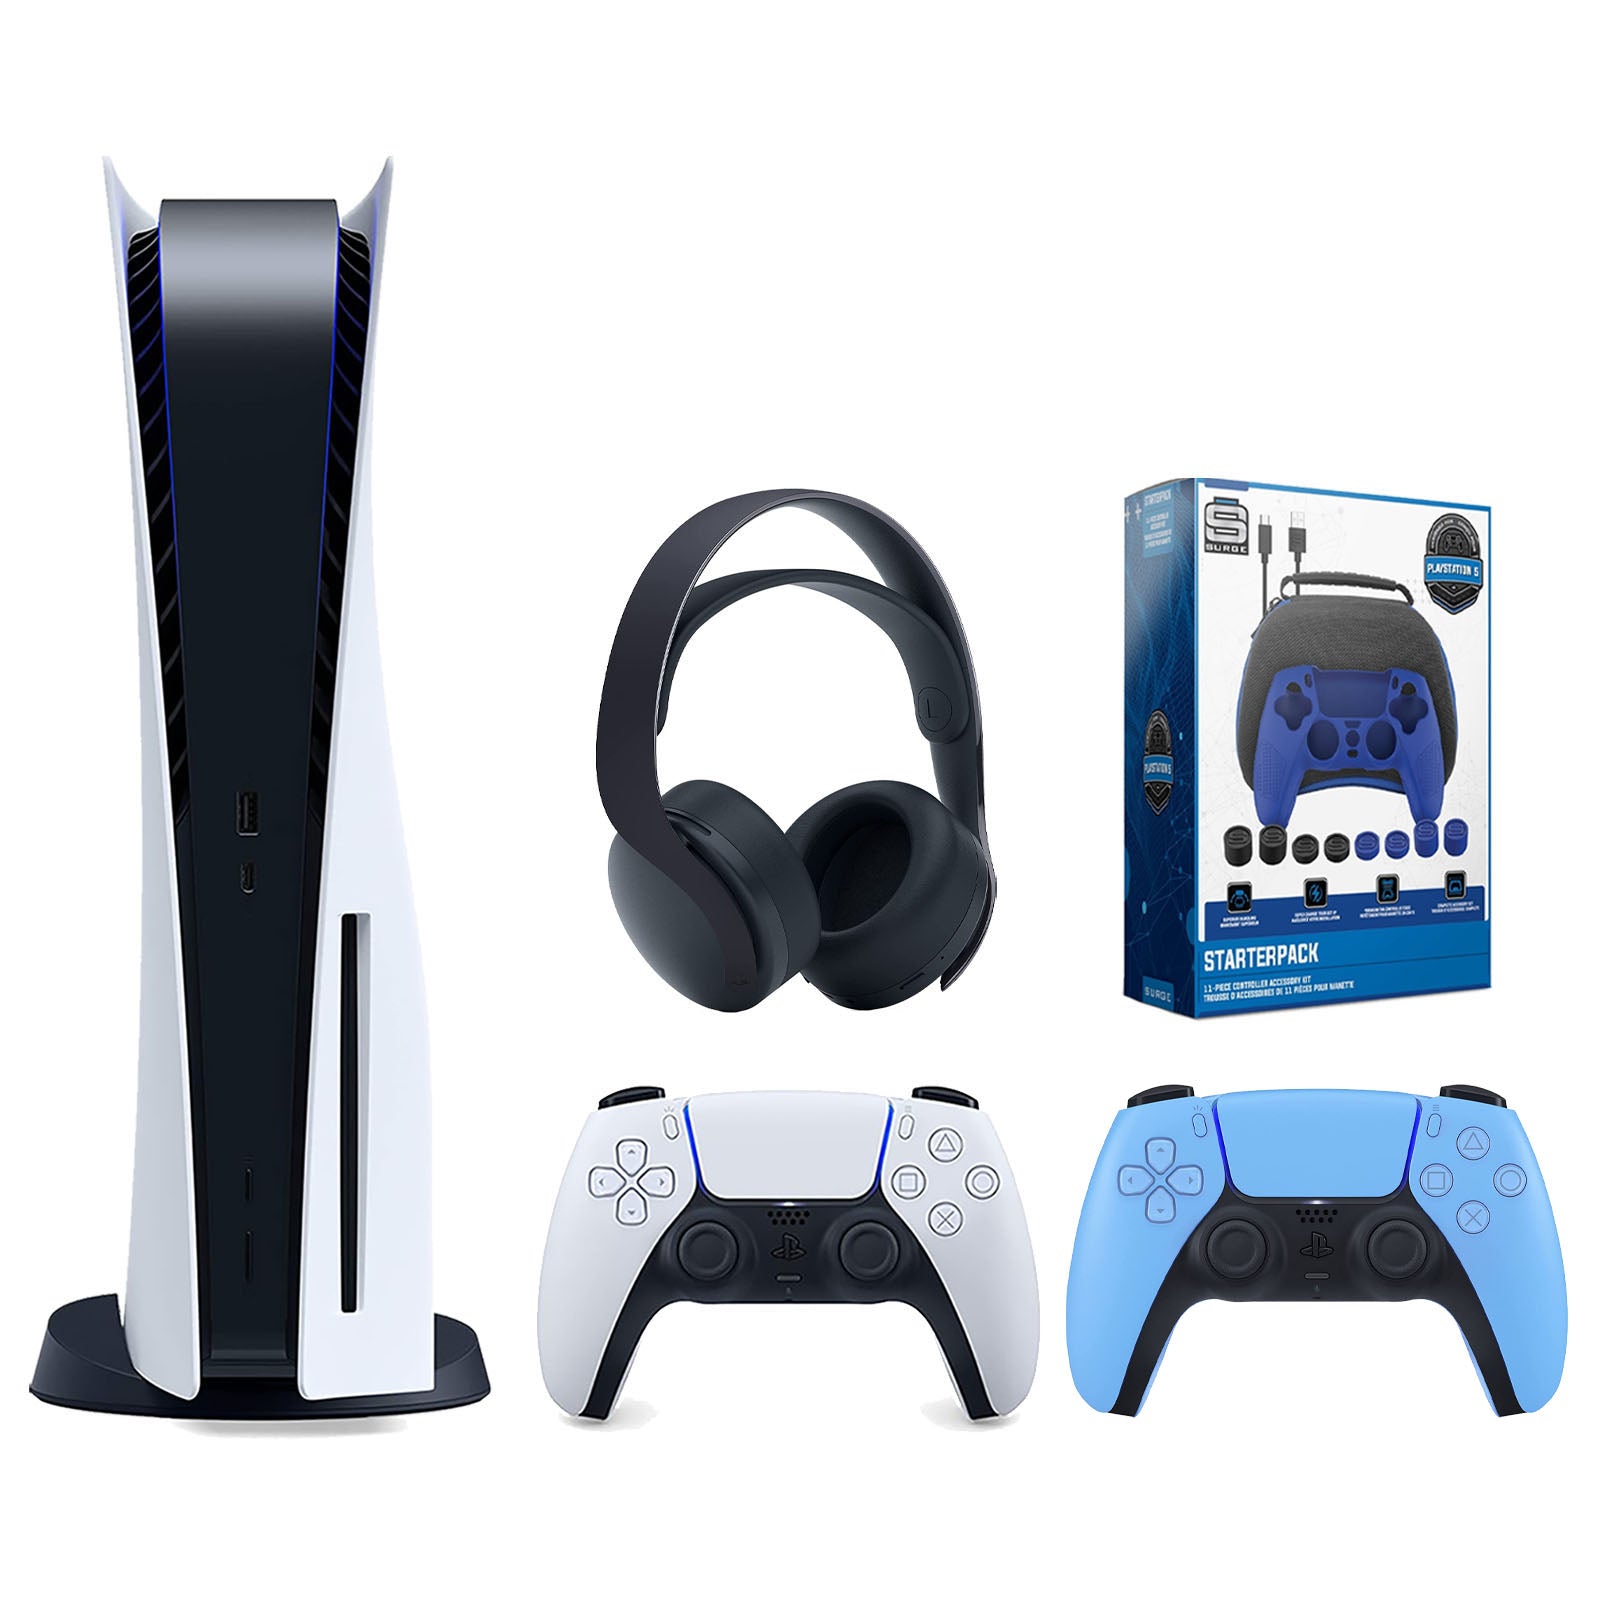 Sony Playstation 5 Disc Version Console with Extra Blue Controller, Black PULSE 3D Headset and Surge Pro Gamer Starter Pack 11-Piece Accessory Bundle - Pro-Distributing